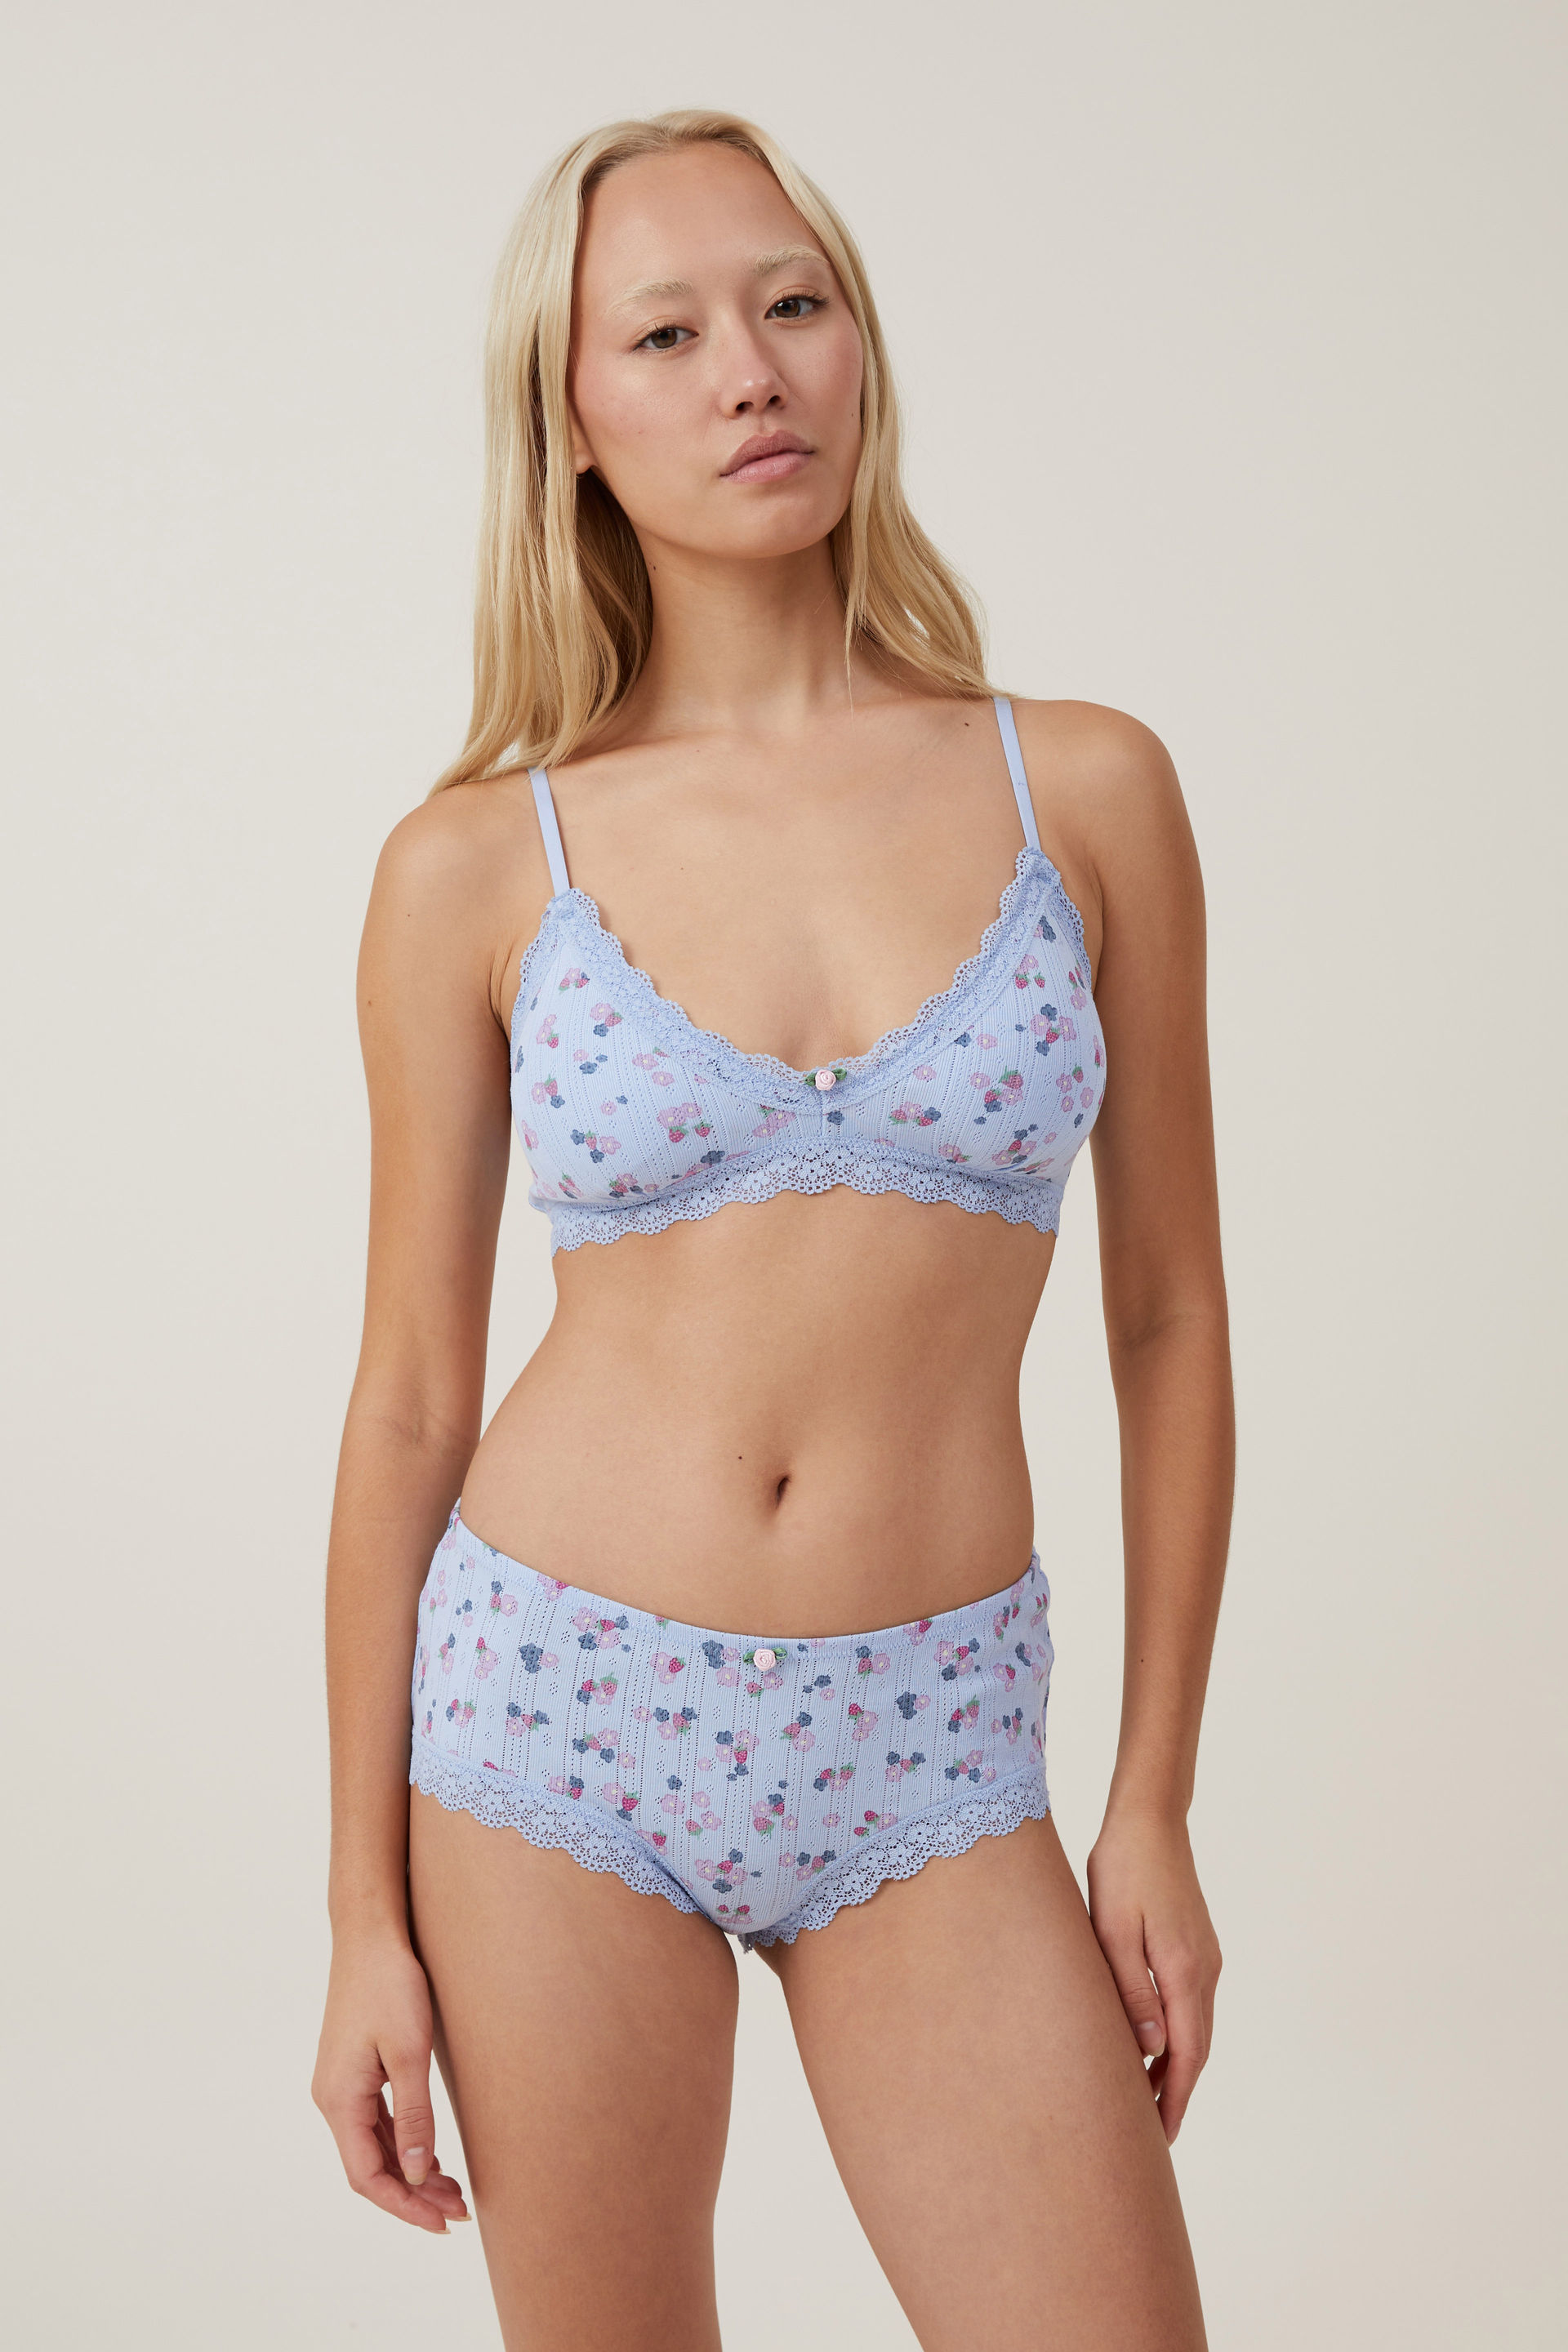 Body - Organic Cotton Lace Triangle Padded Bralette - Lexi strawberry blue pointelle